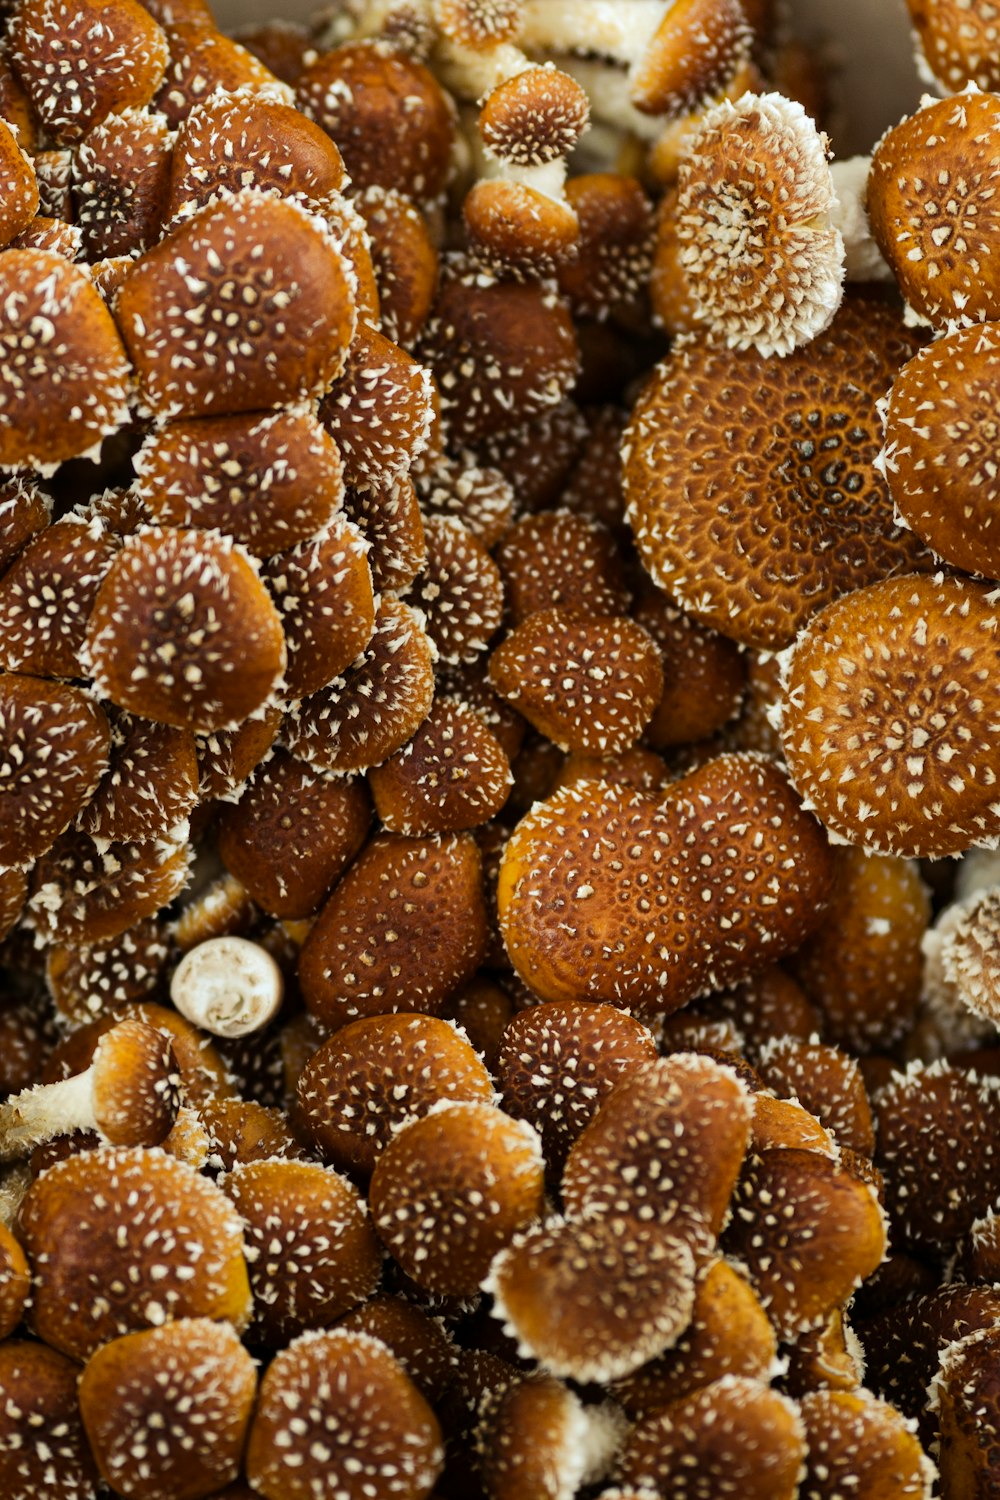 brown and white round fruits